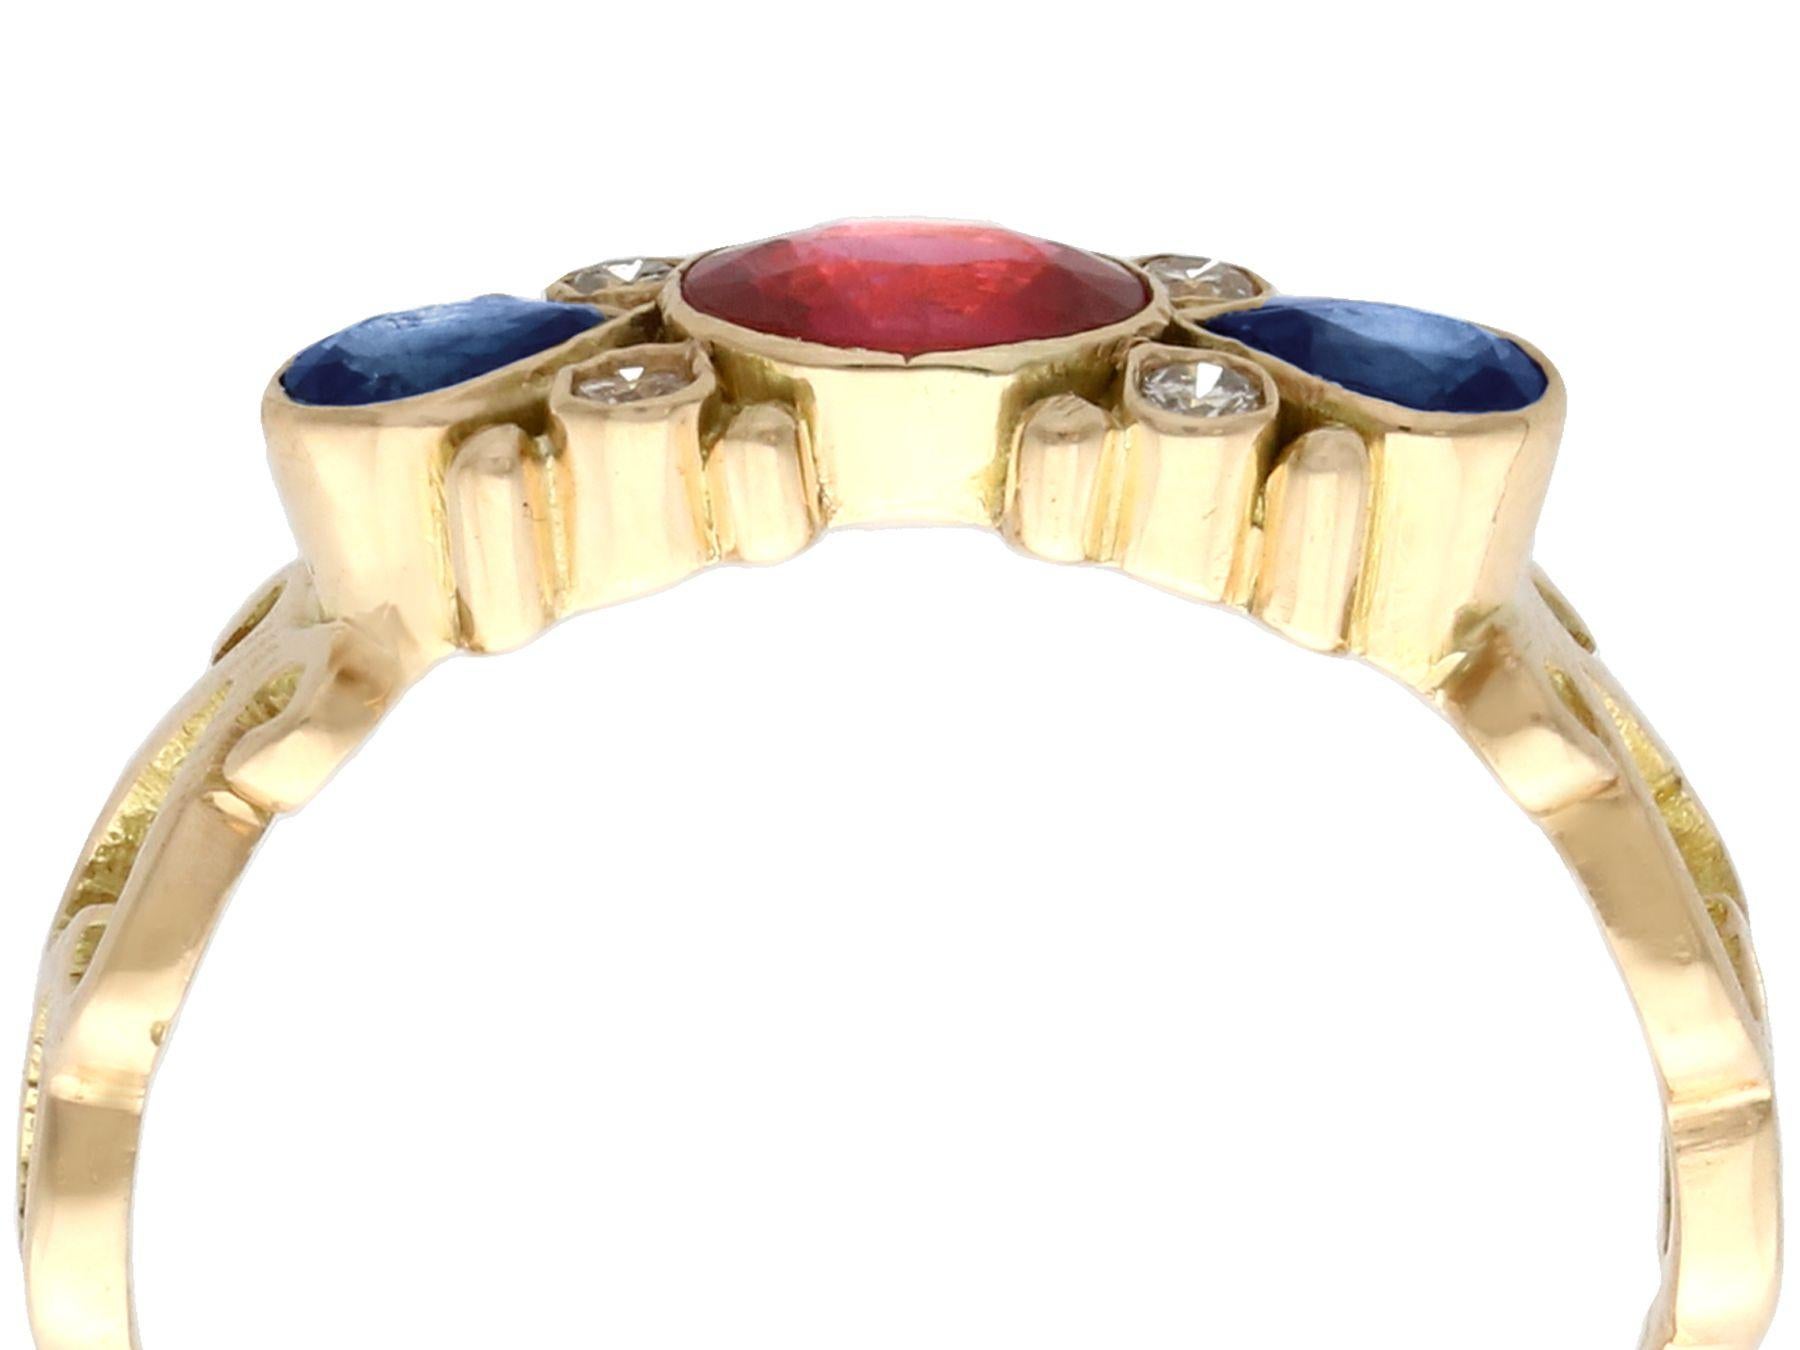 A fine and impressive 0.50 carat ruby, 0.32 carat sapphire and 0.04 carat diamond, 18 karat yellow gold ring; part of our diverse gemstone jewellery collections.

This fine and impressive vintage gemstone ring has been crafted in 18k yellow